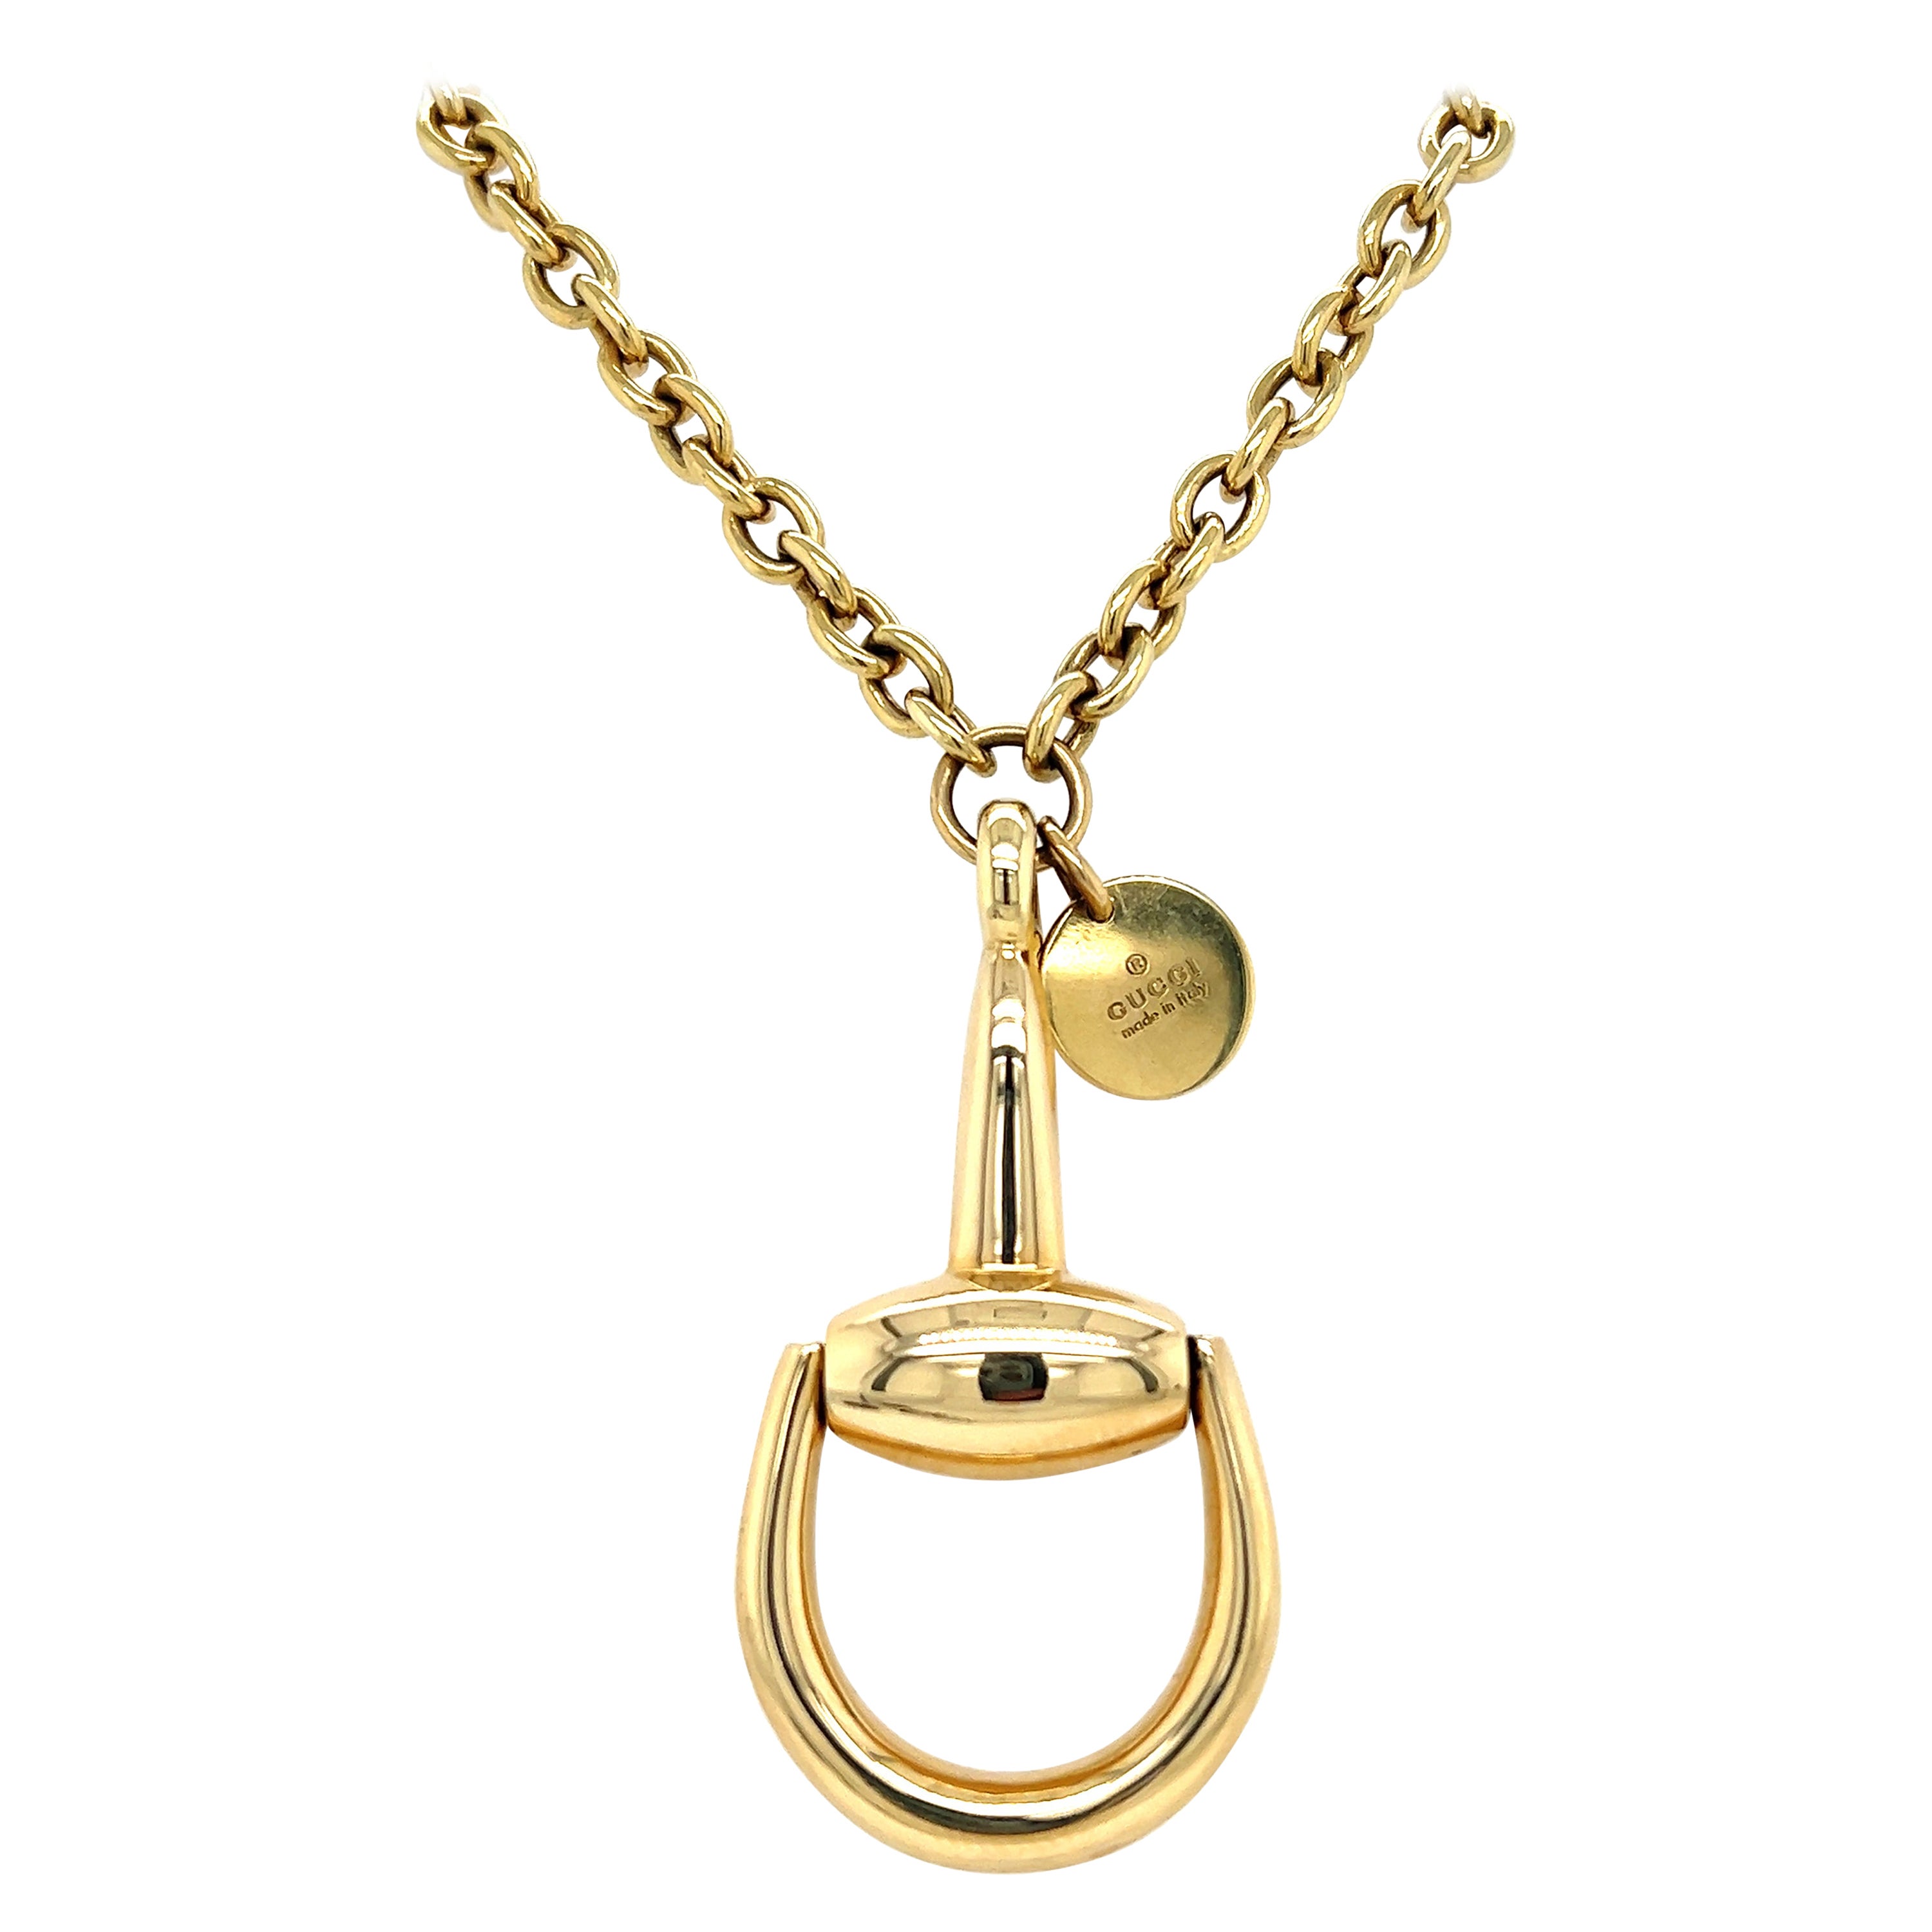 Gucci Vintage Horsebit Large Size Necklace in 18k Yellow Gold 